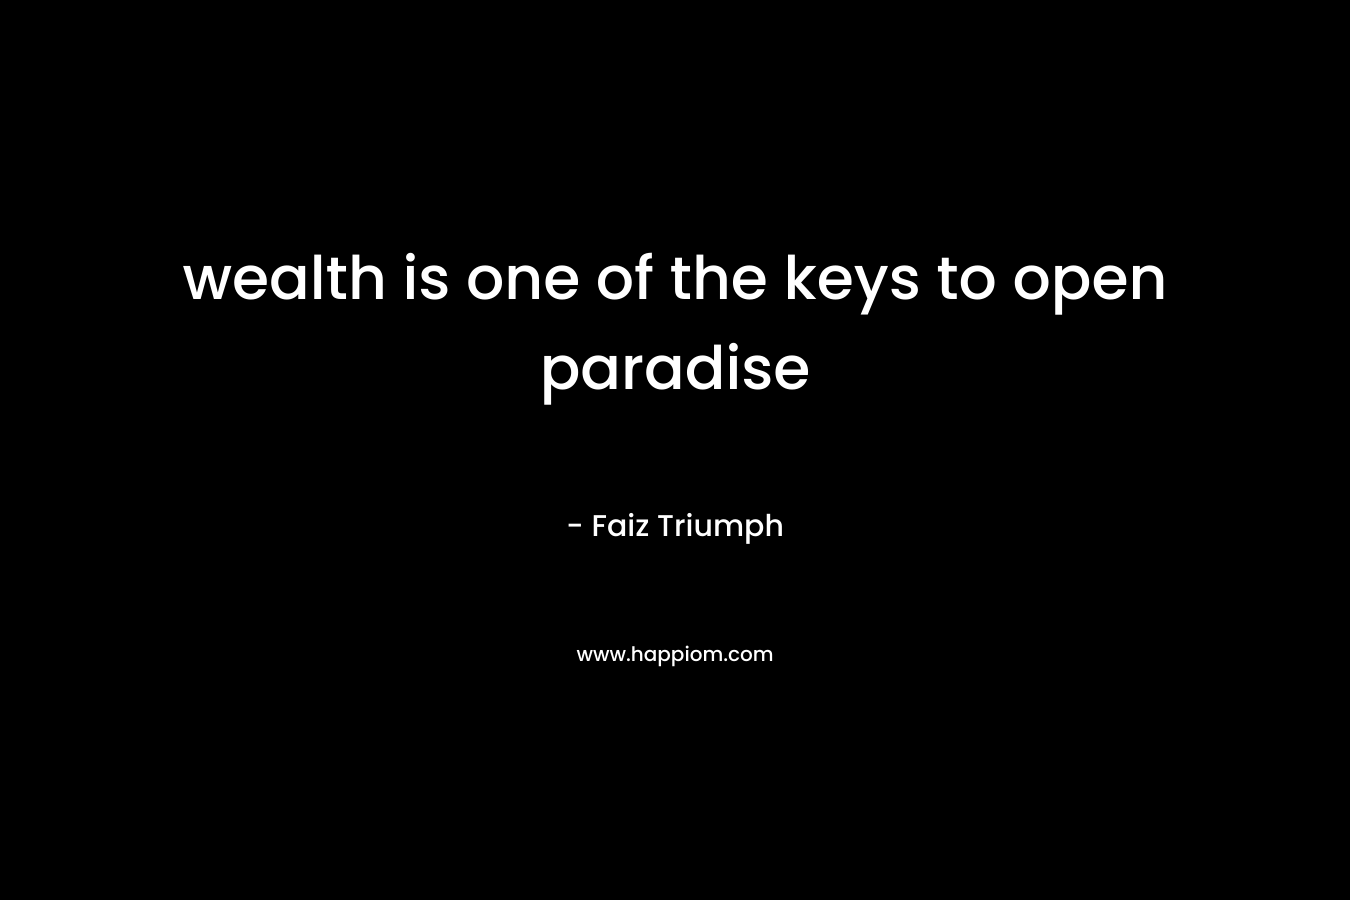 wealth is one of the keys to open paradise